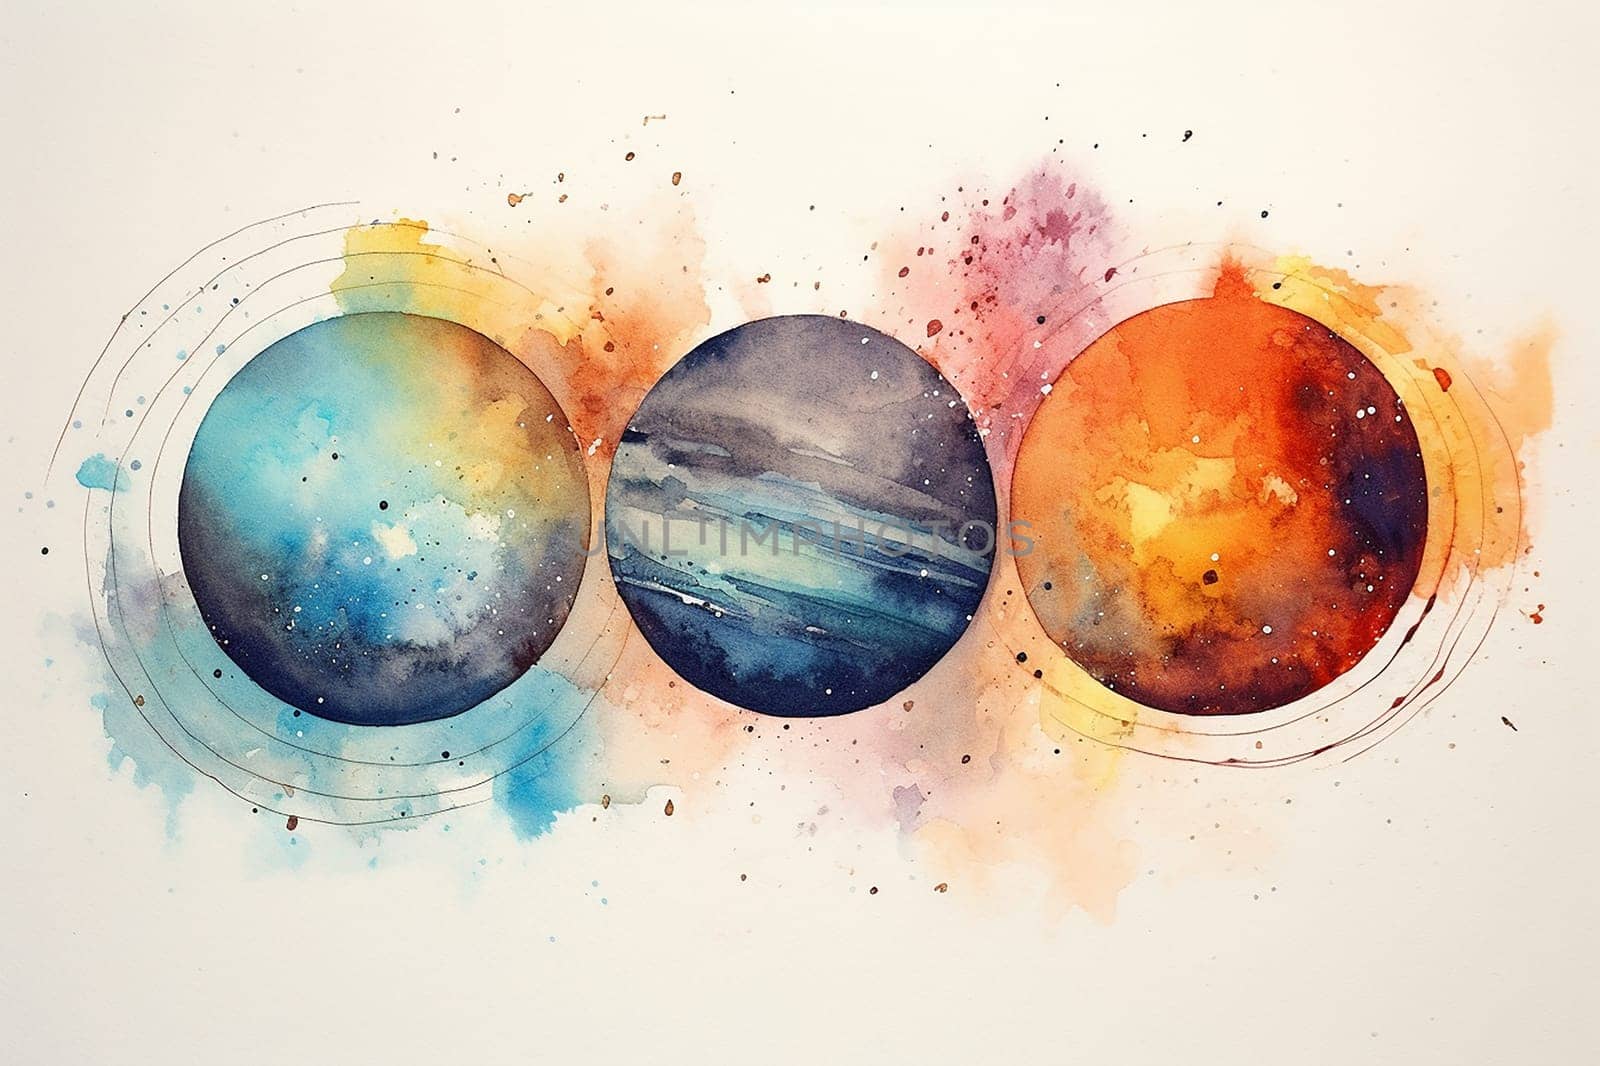 Artistic representation of planets in various colors against a starry background by Hype2art